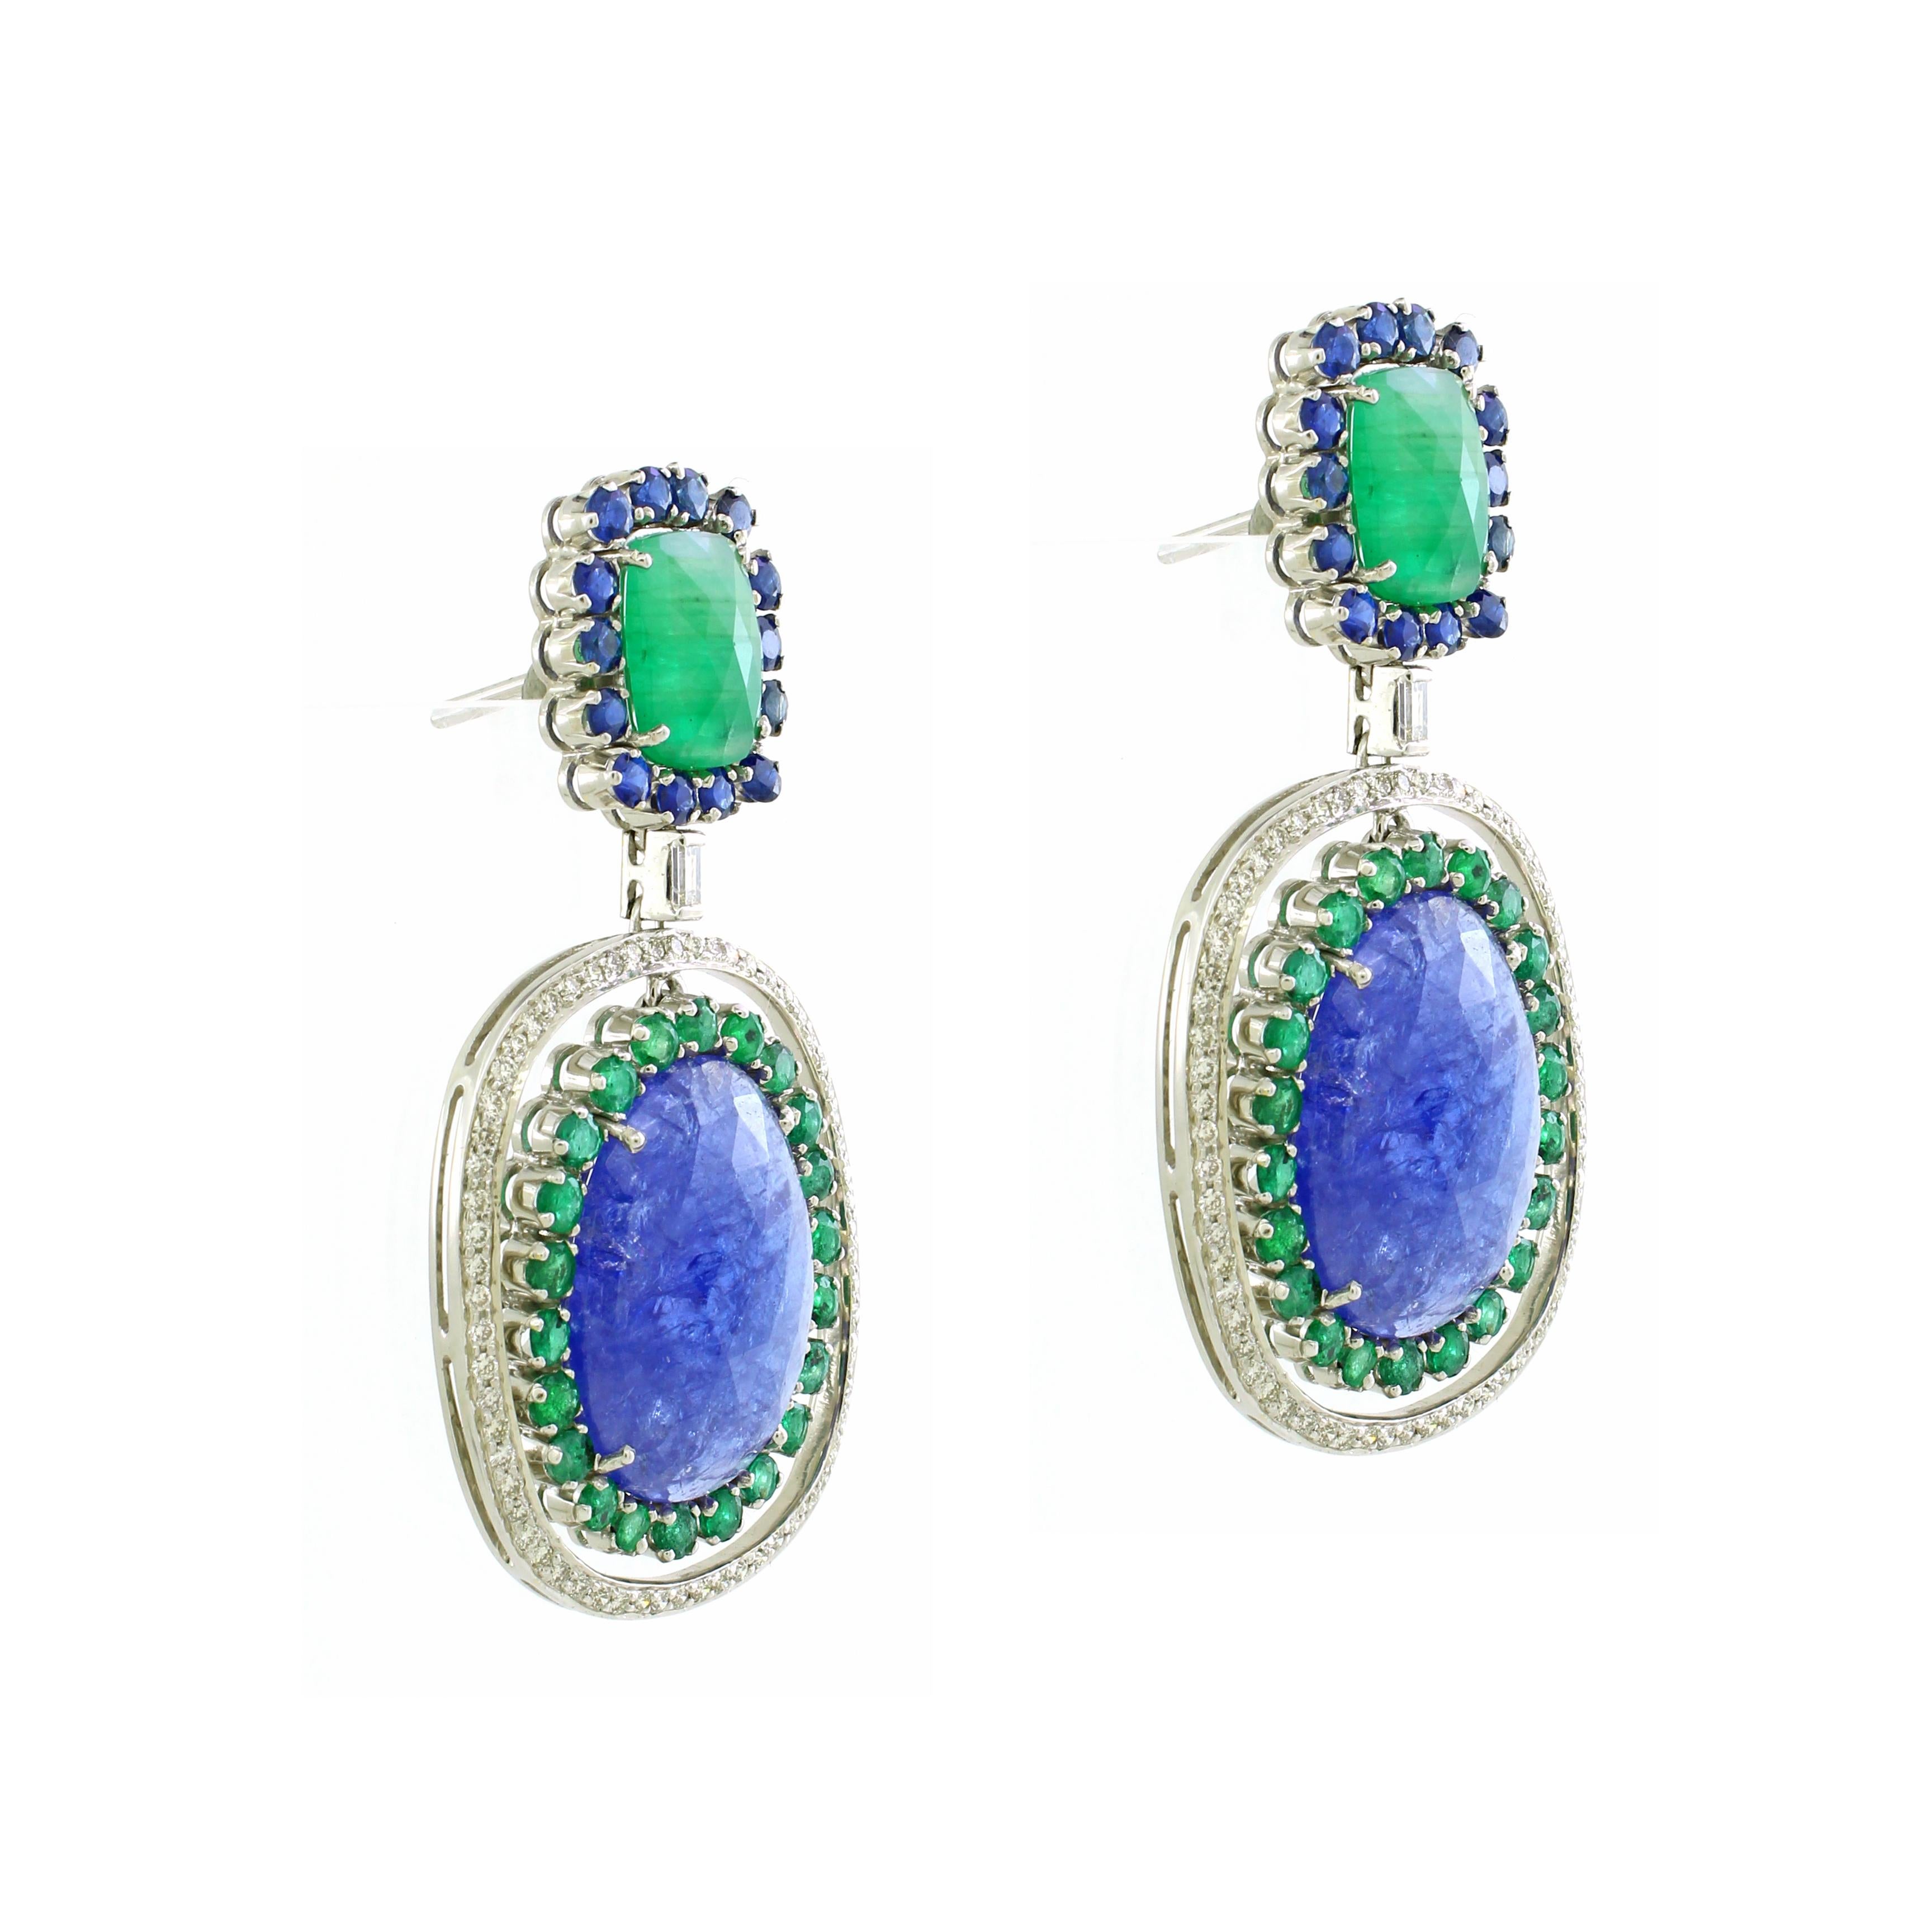 Introducing our enchanting Drop Earrings, a mesmerizing blend of elegance and allure. At the pinnacle of each earring rests a verdant green rose-cut gemstone, exuding natural radiance and charm, enveloped by a halo of brilliant blue round sapphires,